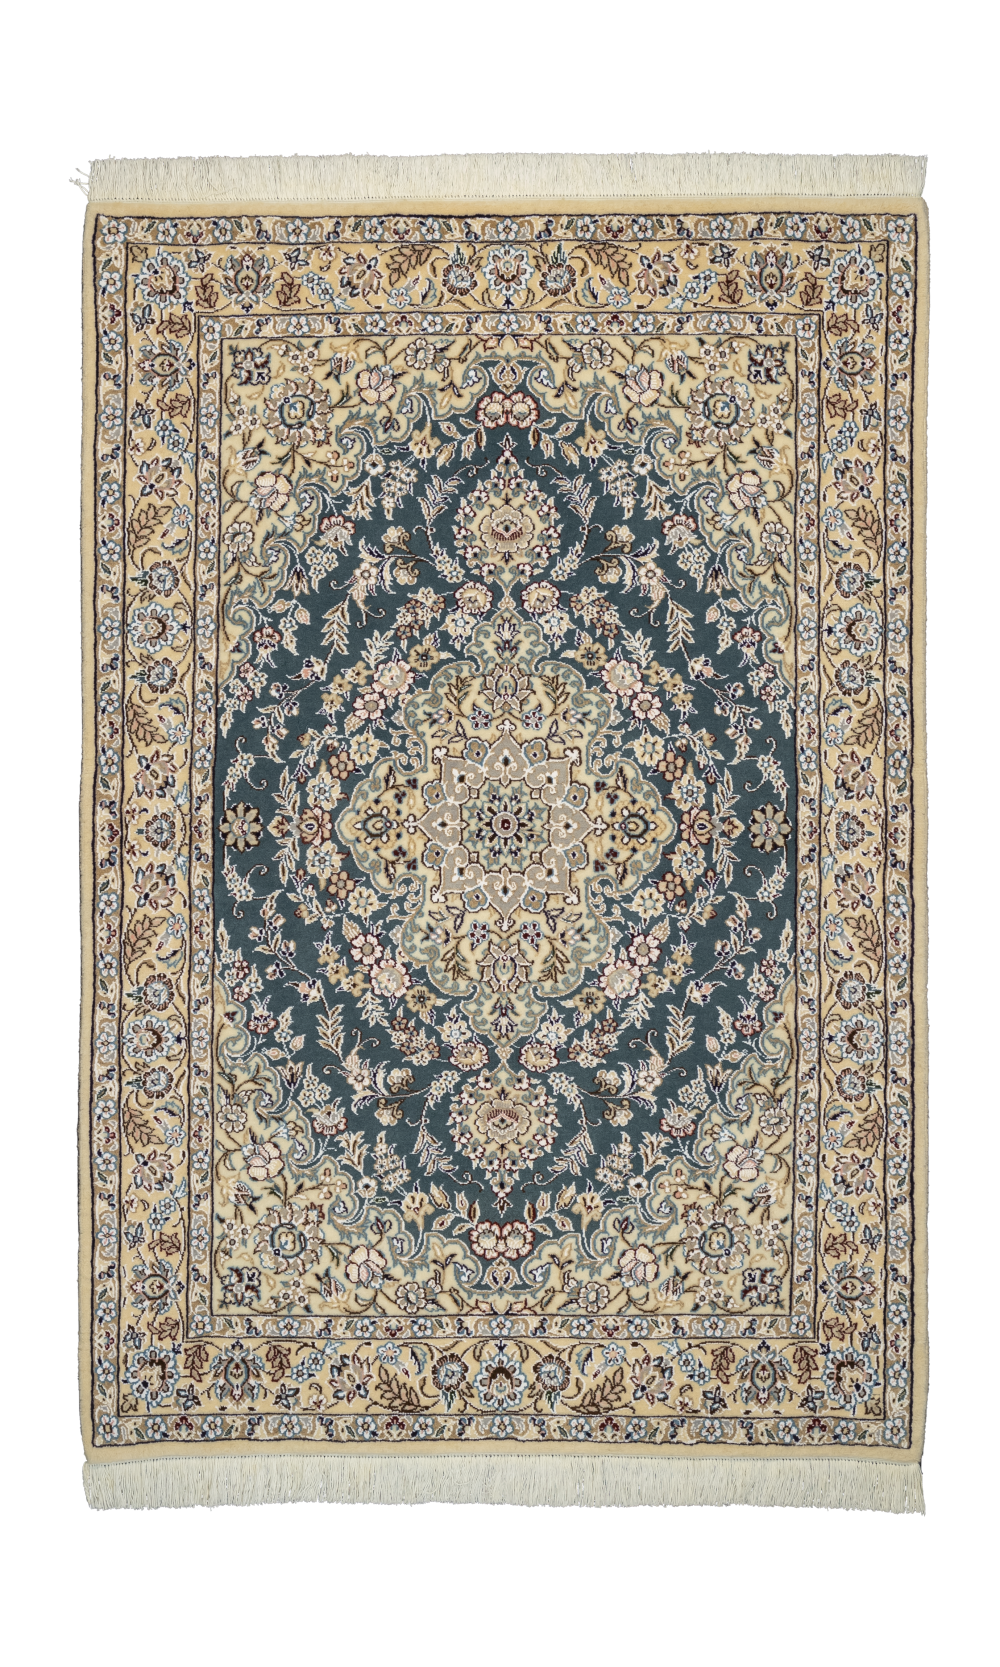 This Handmade Rug In Wool & Green color Naeen rug | 158x106 cm